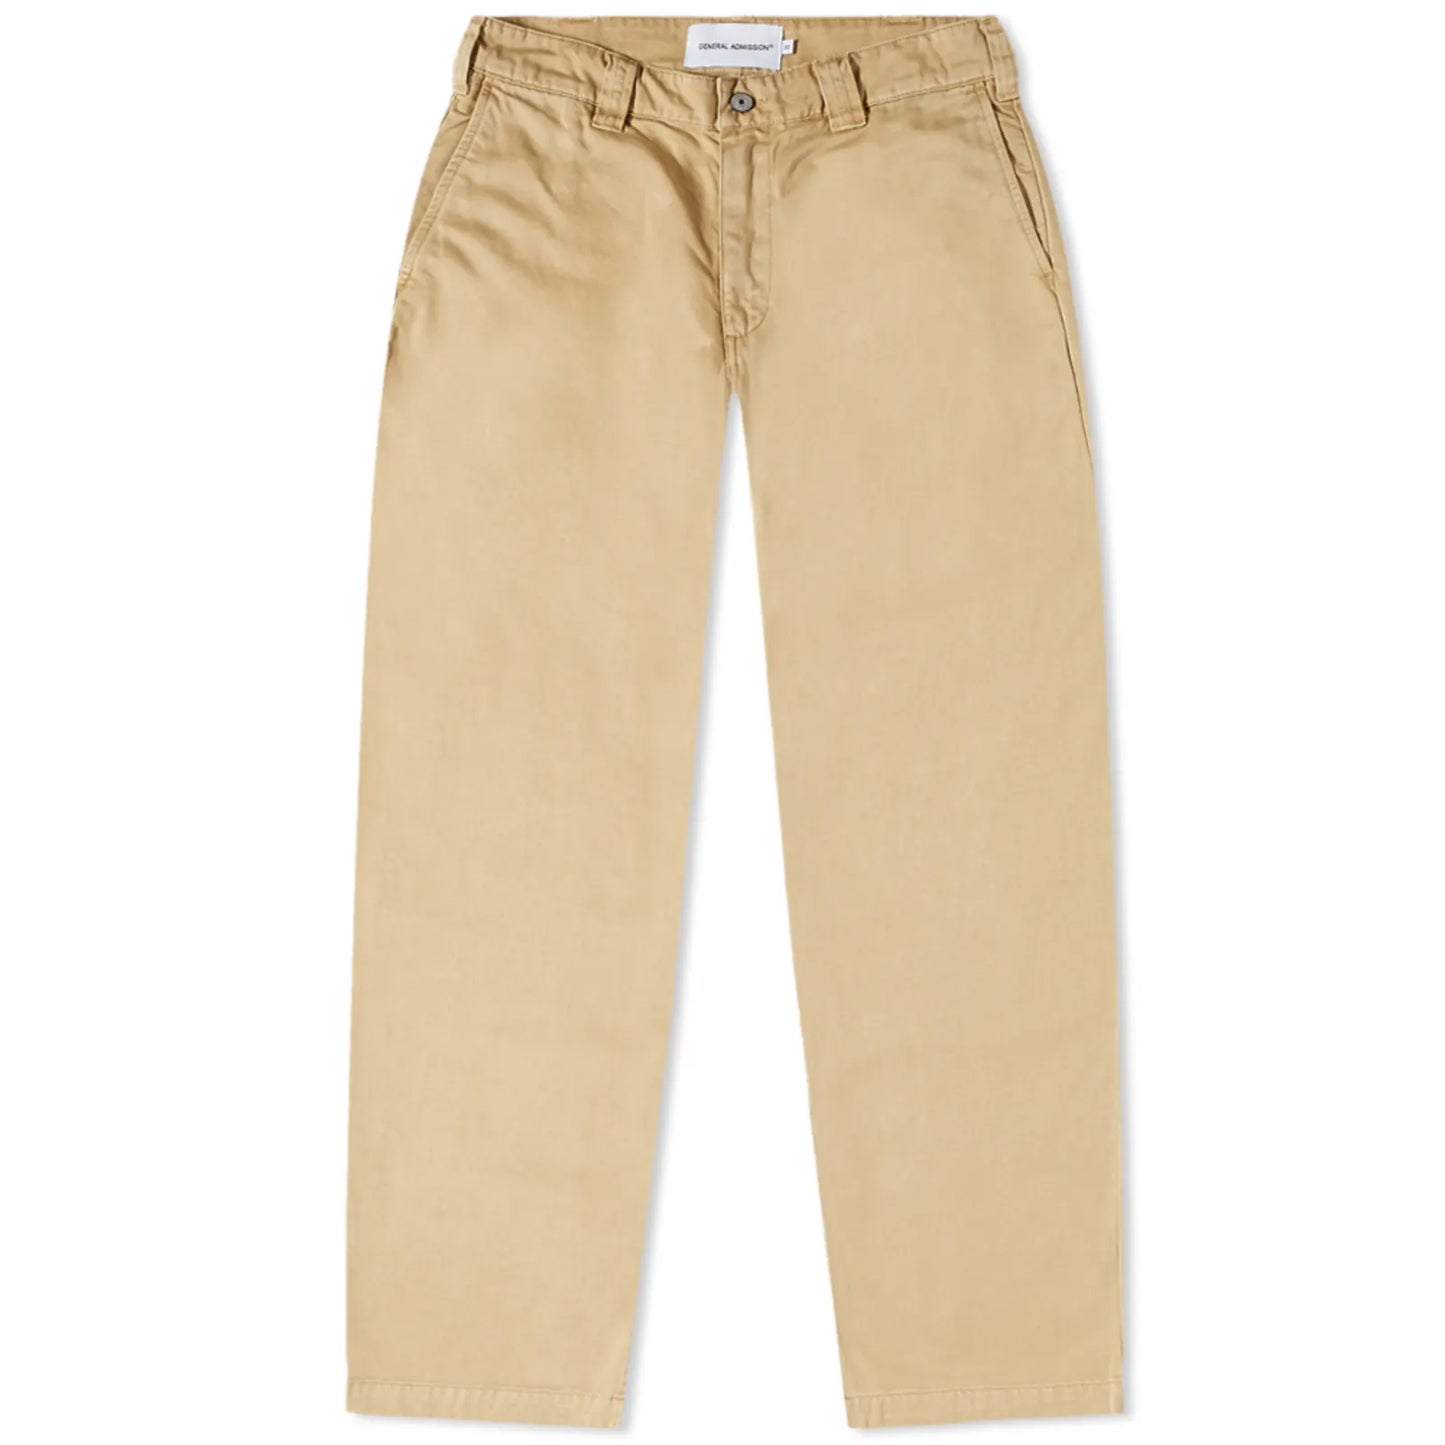 General Admission - GENERAL ADMISSION PICO PANT IN KHAKI - Rent With Thred